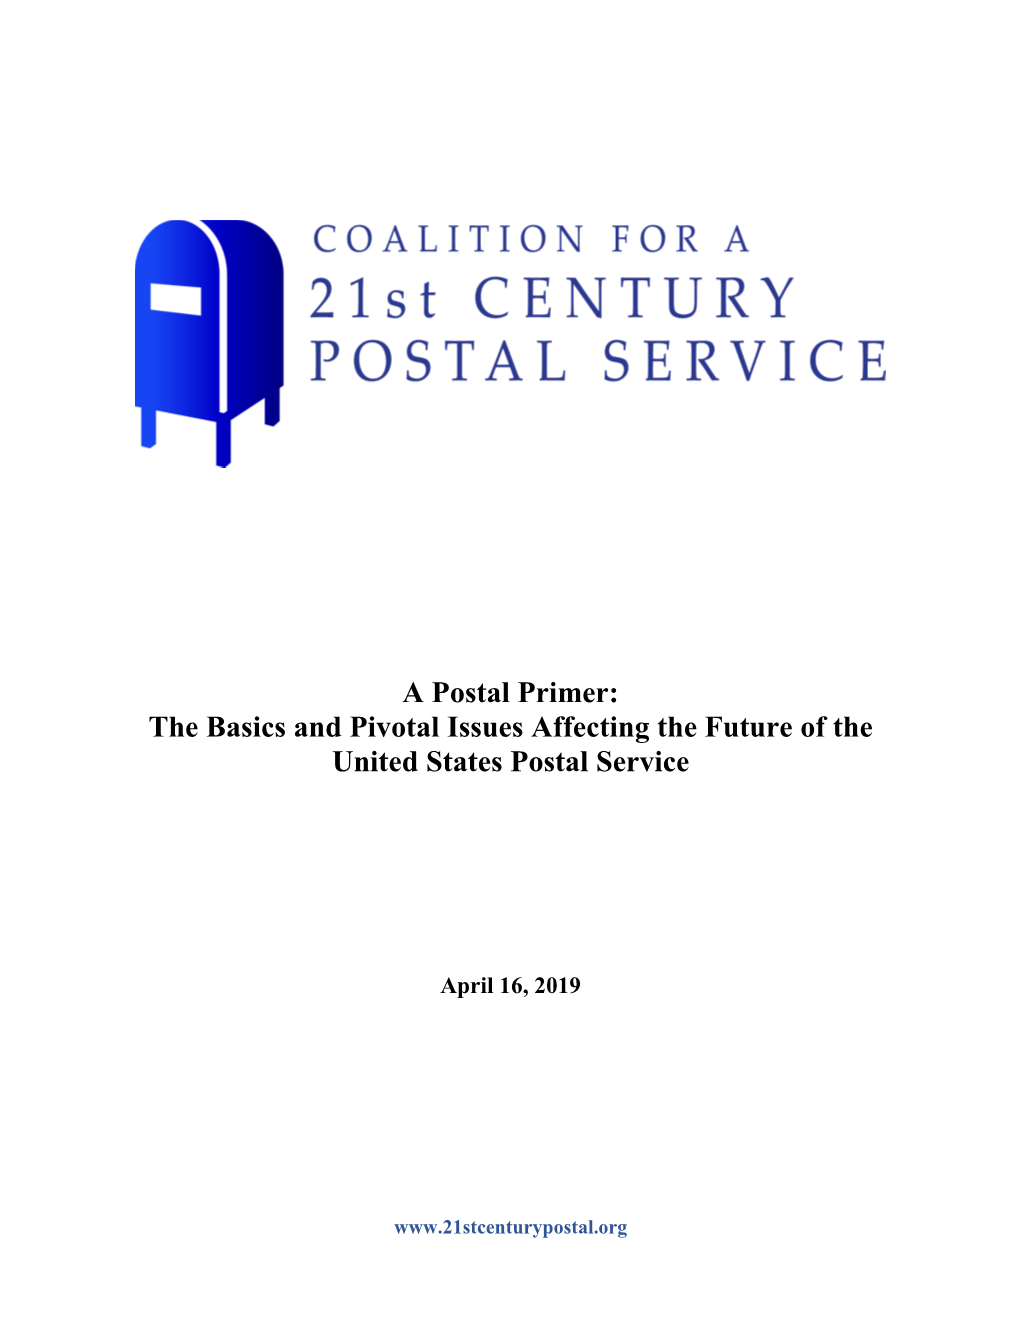 A Postal Primer: the Basics and Pivotal Issues Affecting the Future of the United States Postal Service